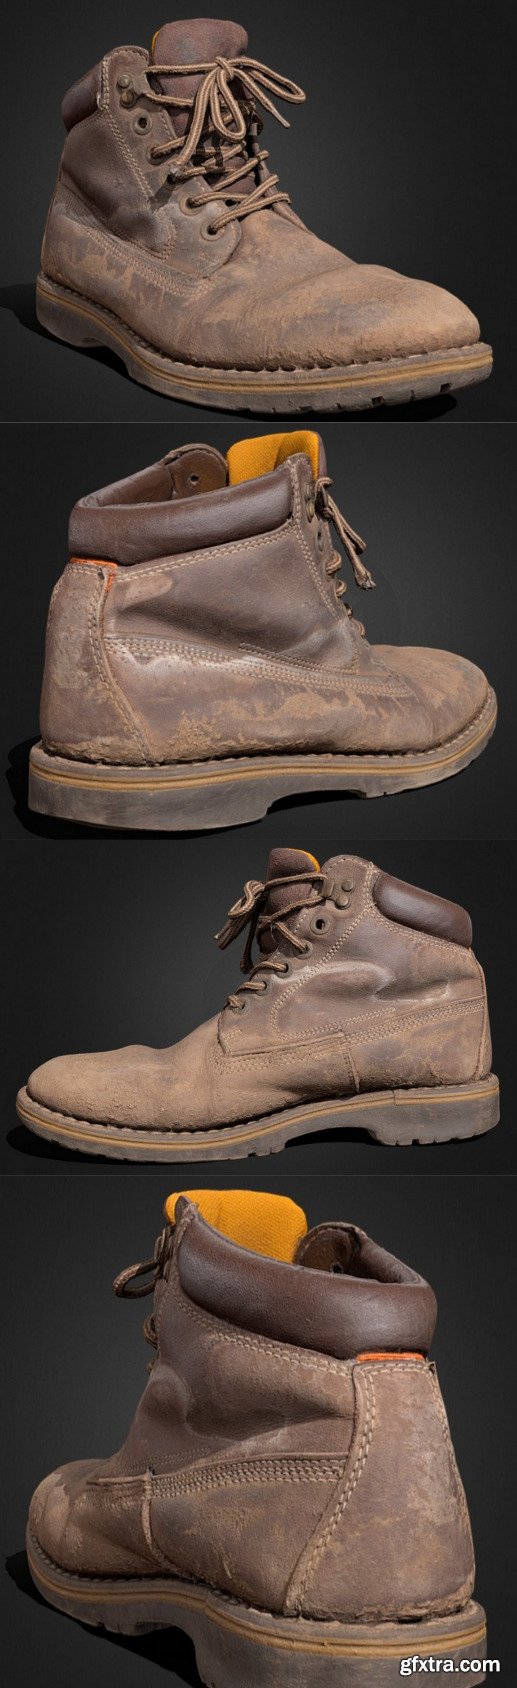 Old Dirty Boot 3D Model